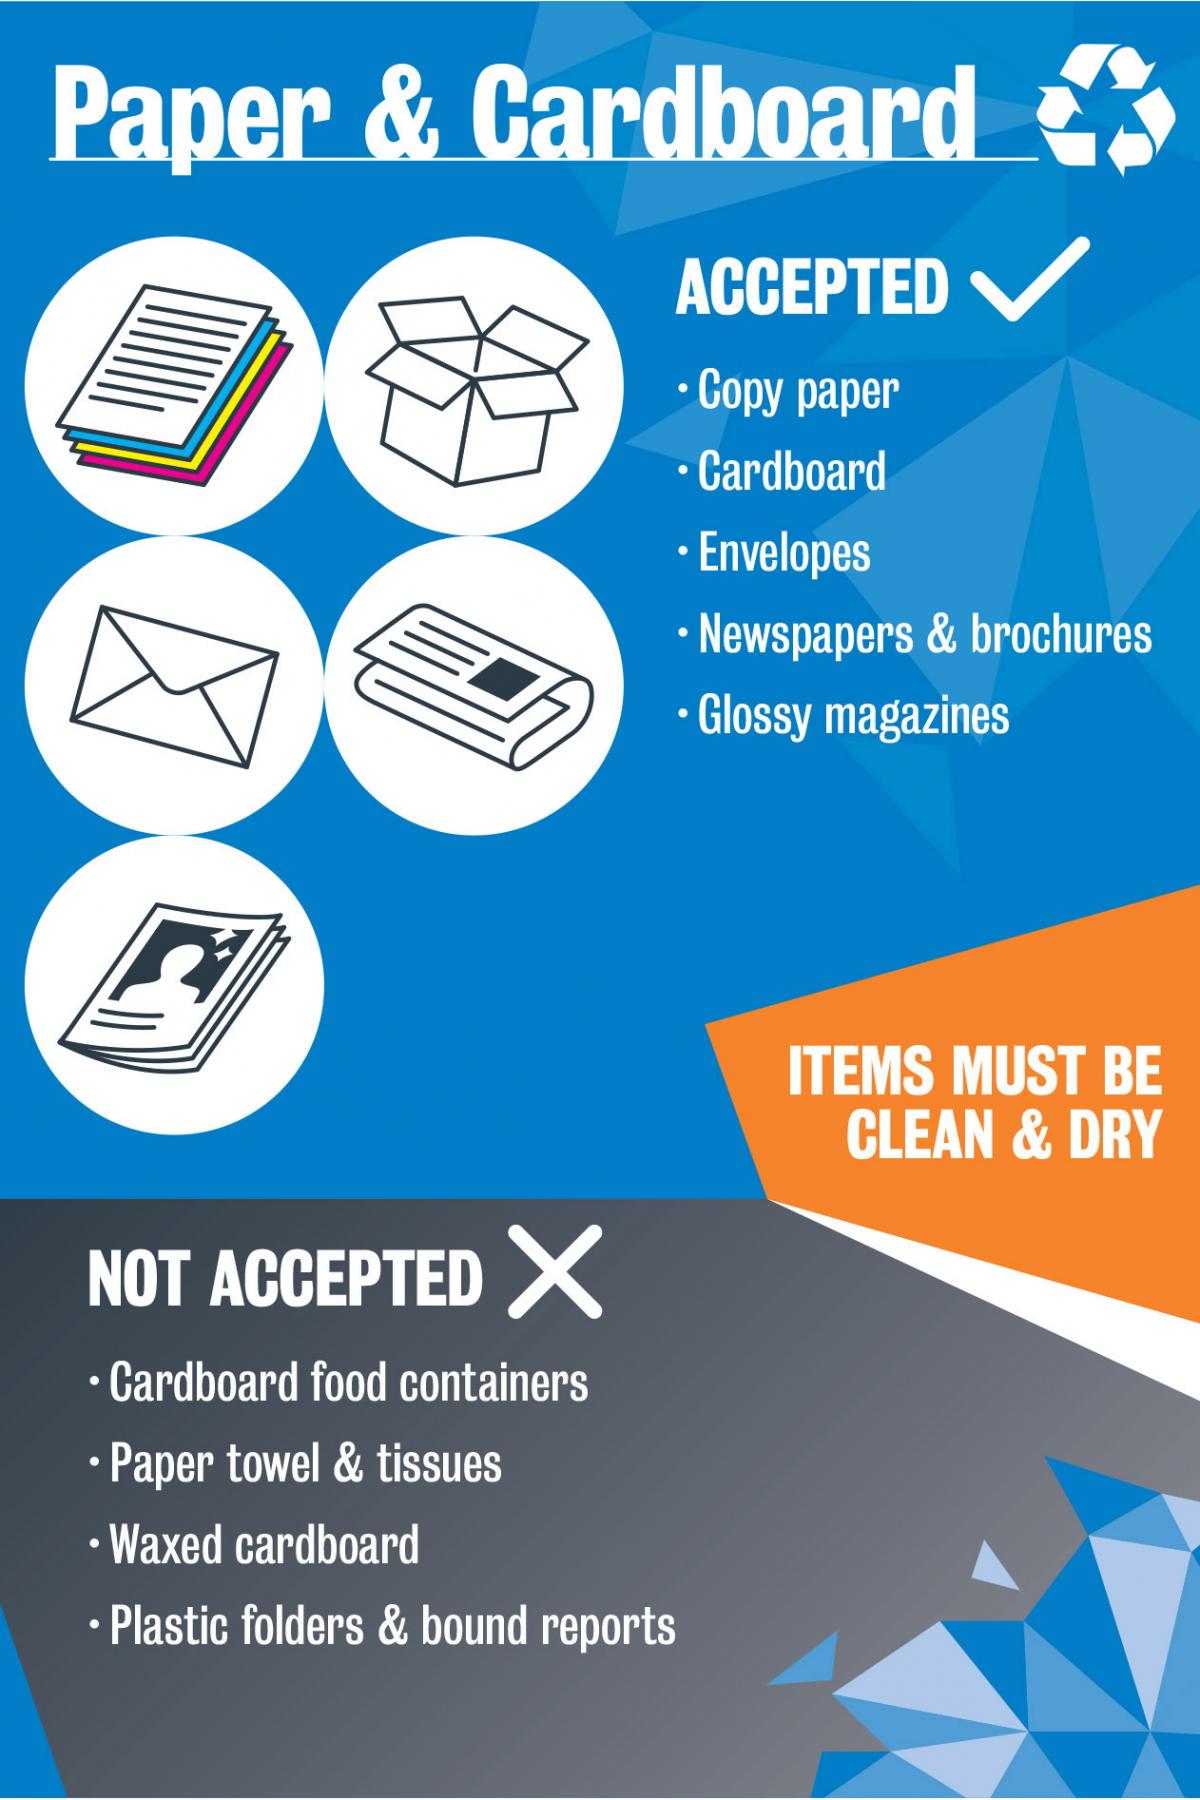 Accepted in blue bin - paper, cardboard, envelopes, newspapers & brochures, glossy magazines; not accepted - cardboard food containers, paper towel & tissues, waxed card, plastic folders & bound reports